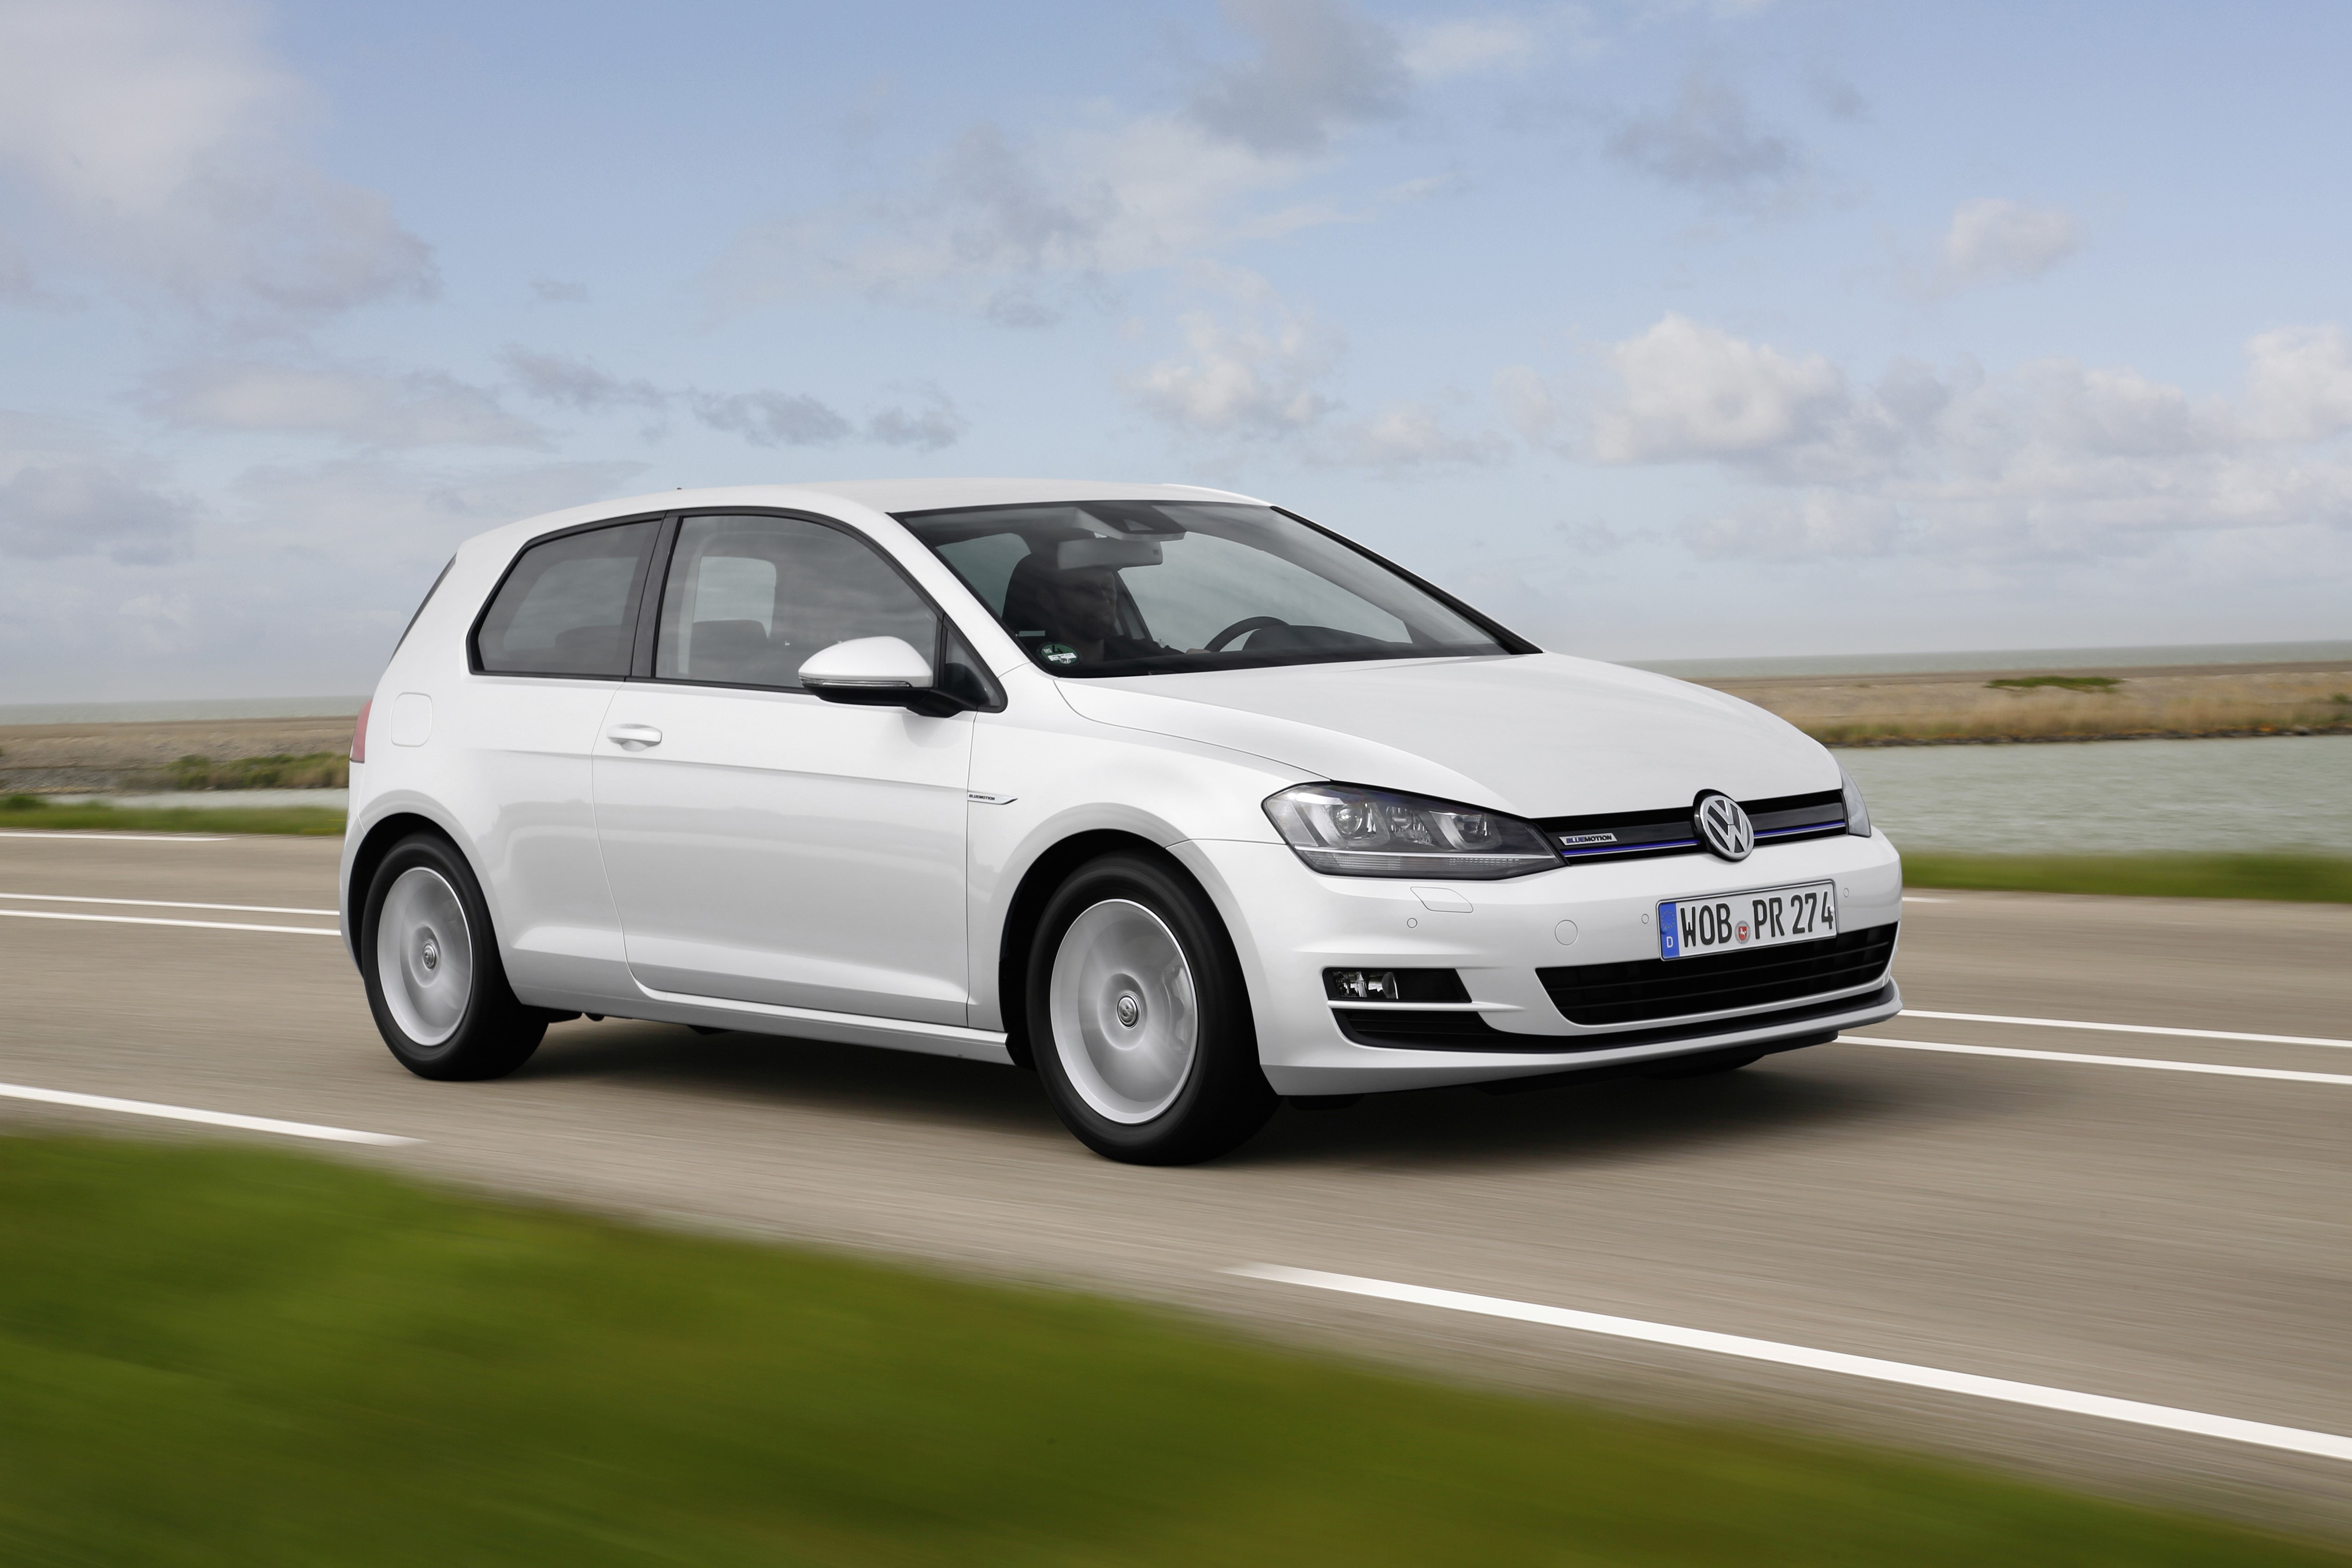 Volkswagen Golf 1.0 TSI BlueMotion Debuts With 3Cylinder